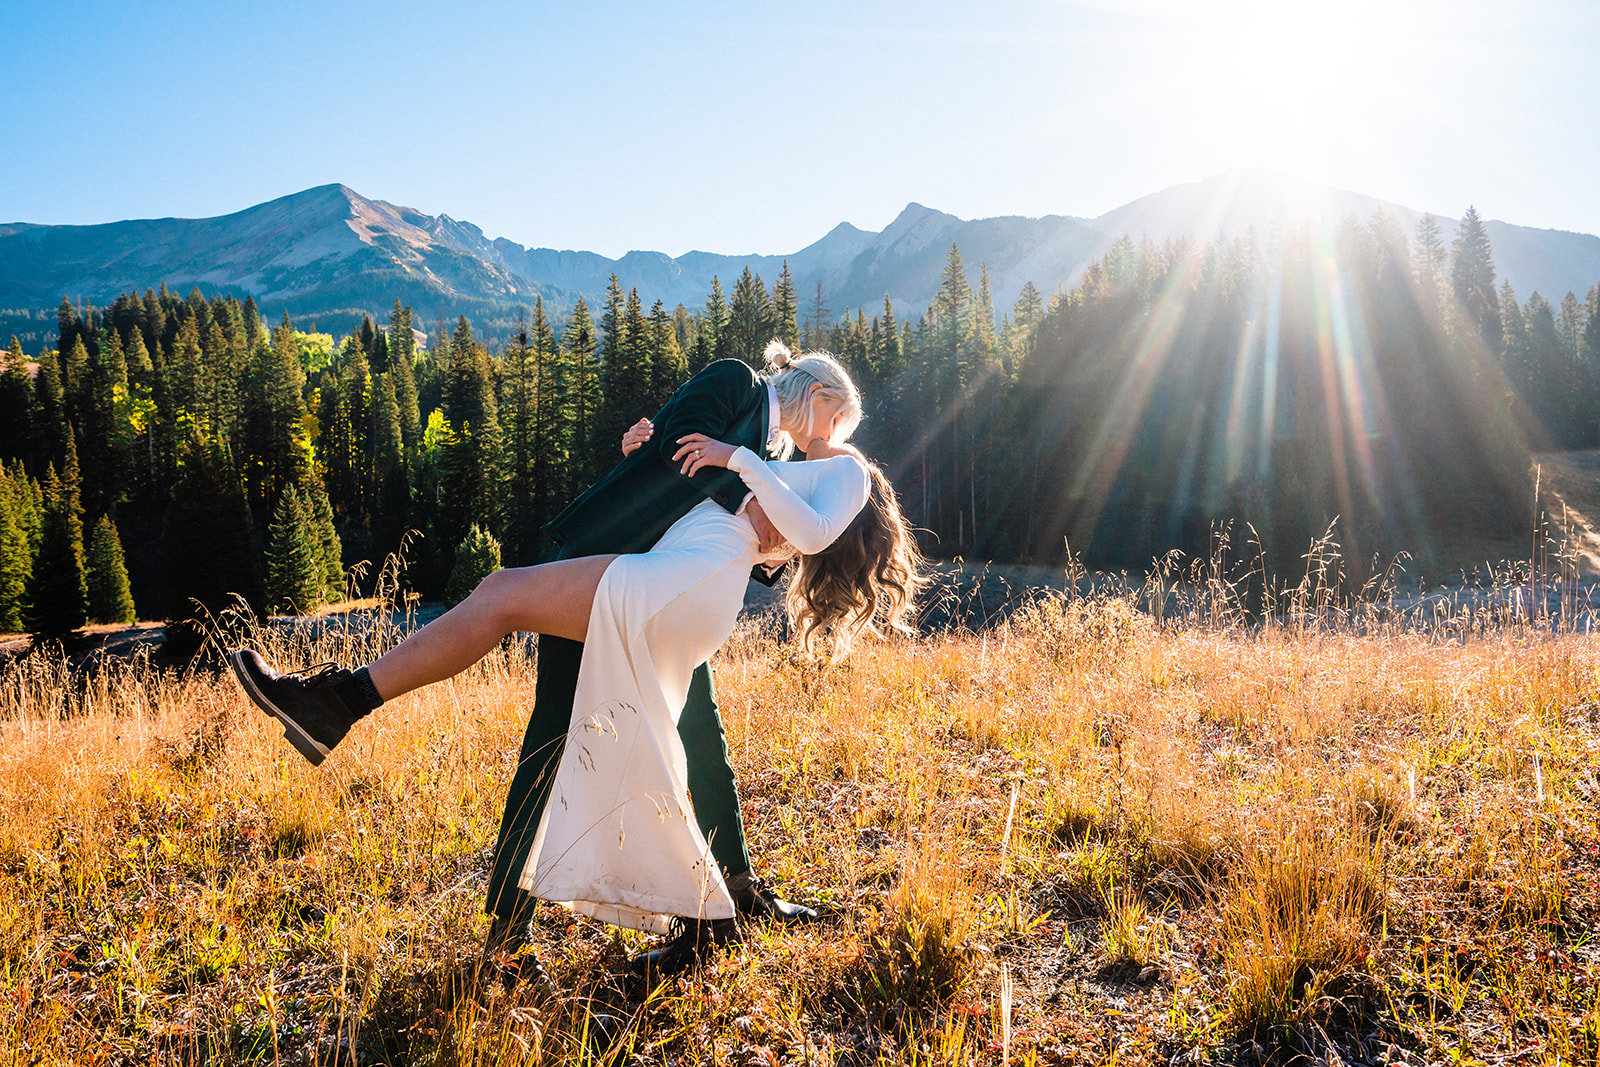 A beautiful lesbian elopement day at Crested Butte in Colorado